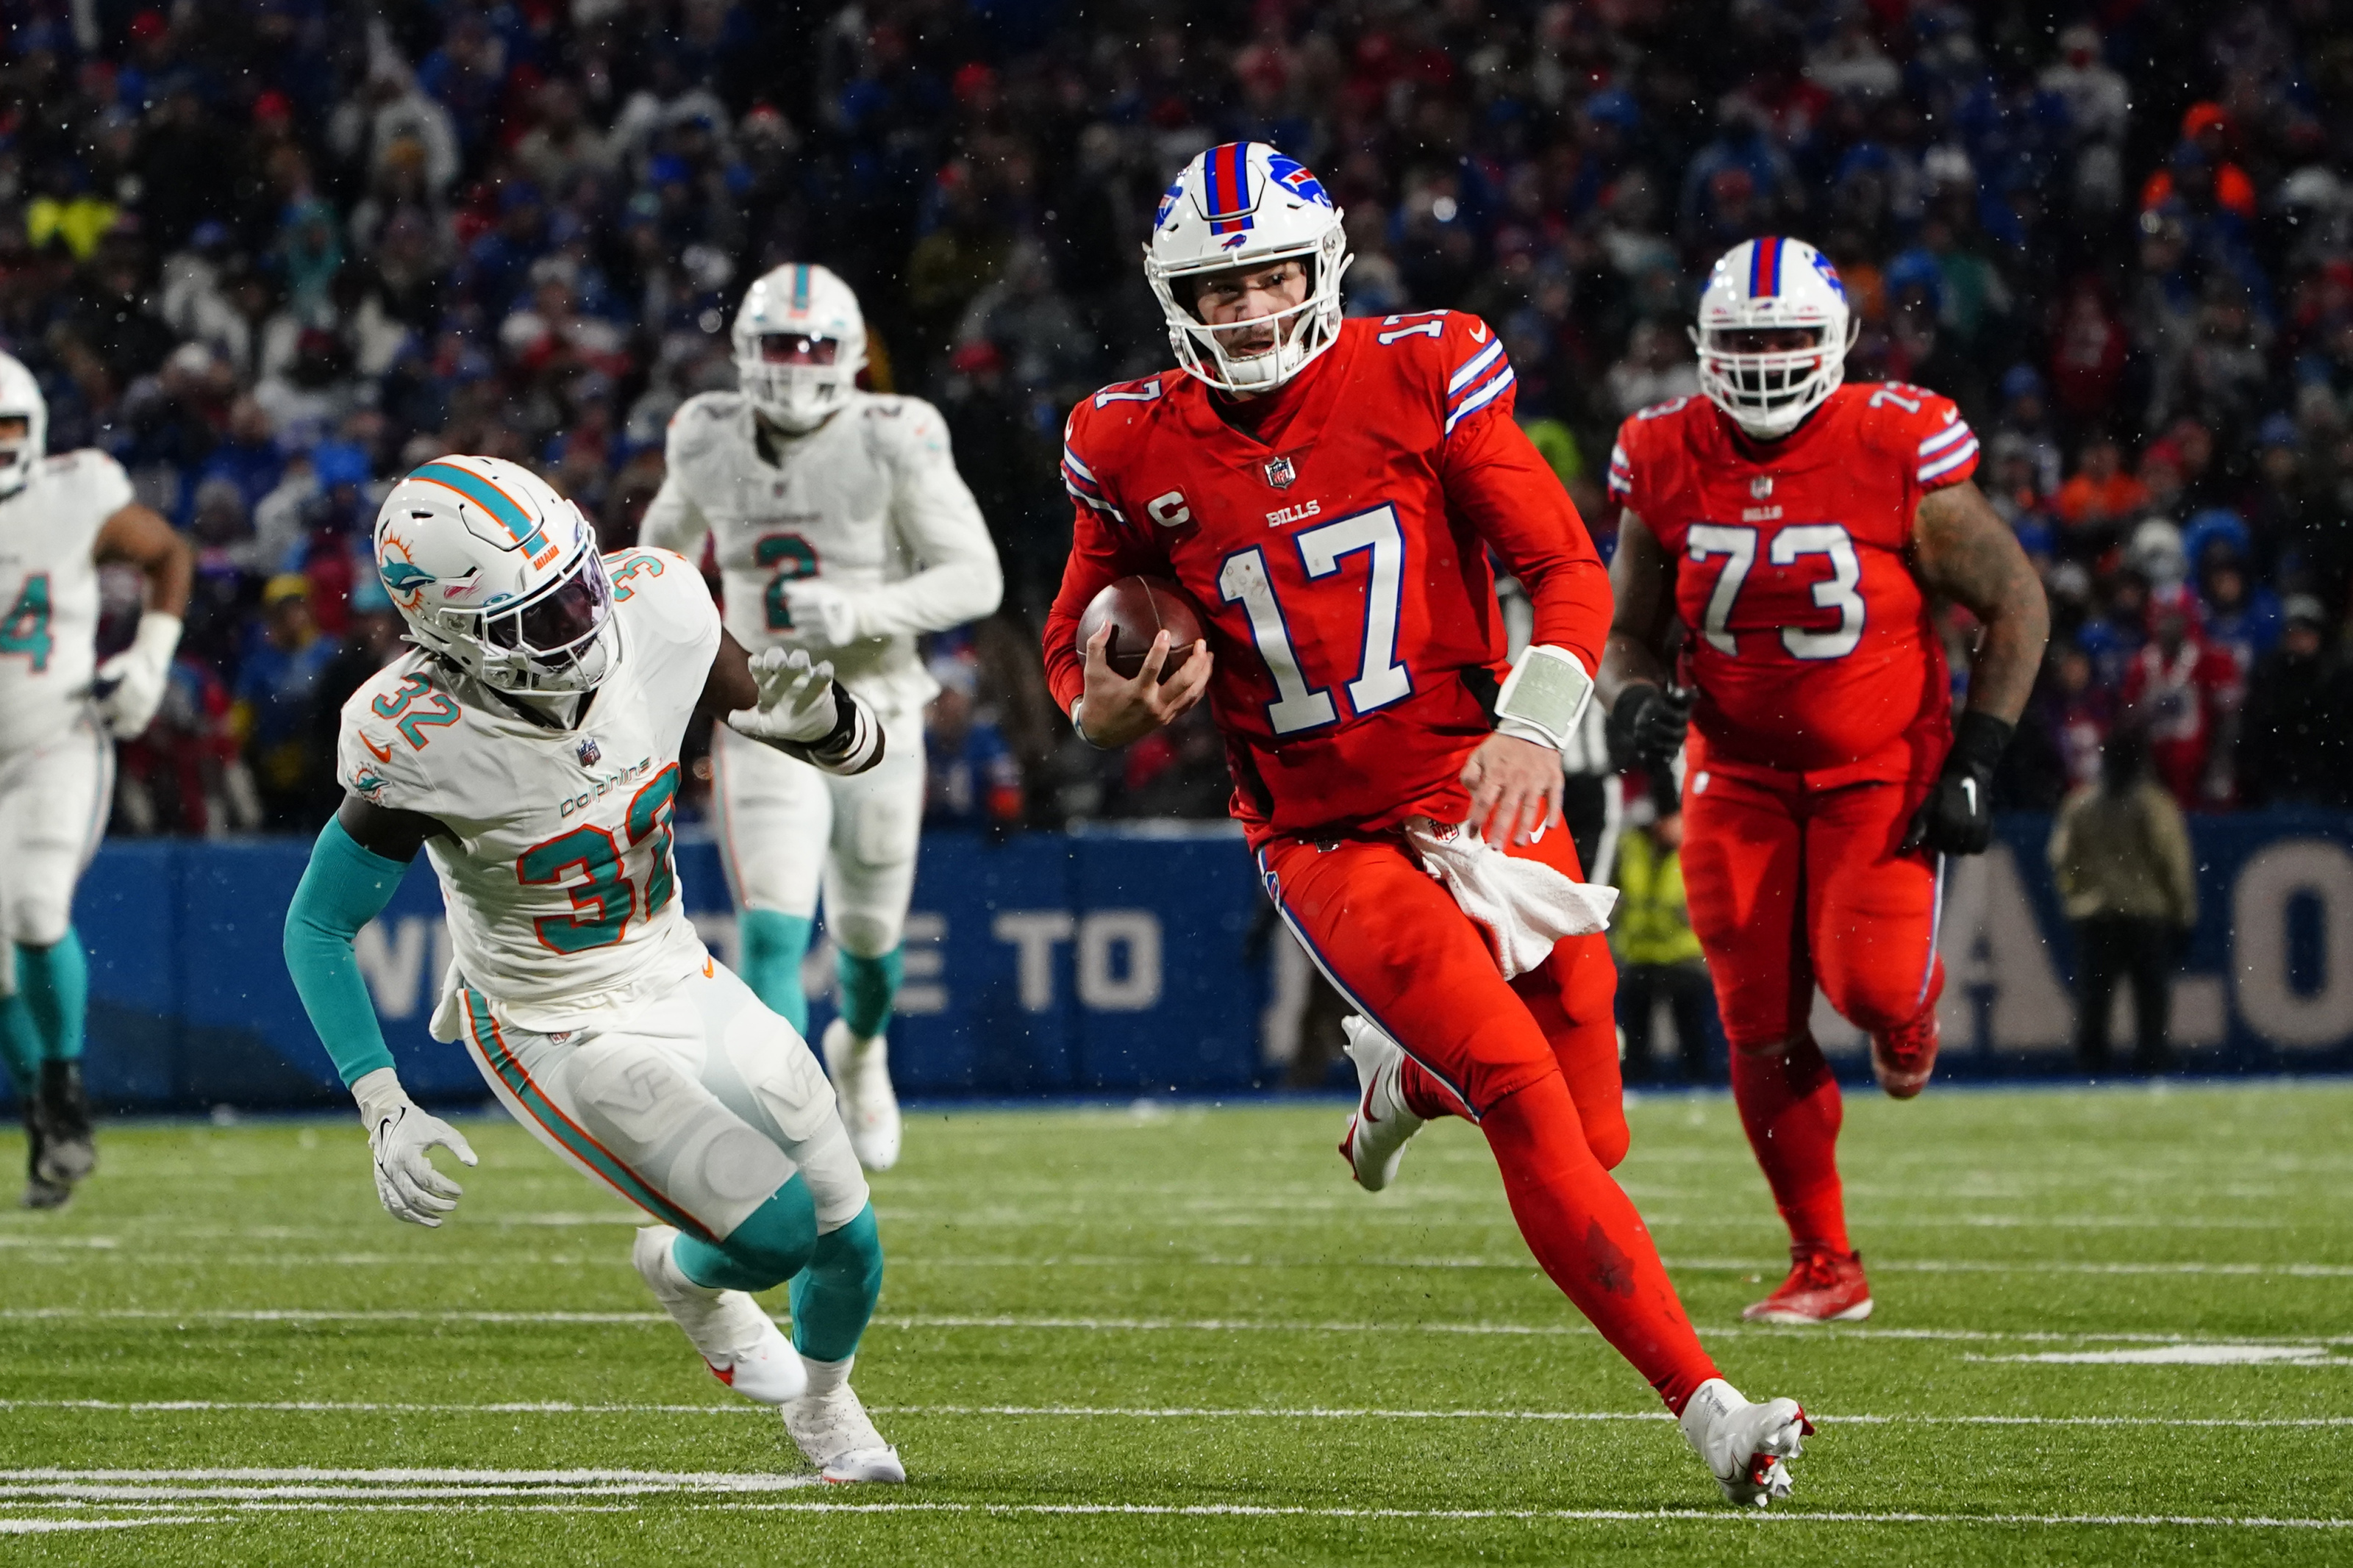 2023 NFL picks, score predictions for Wild Card Round